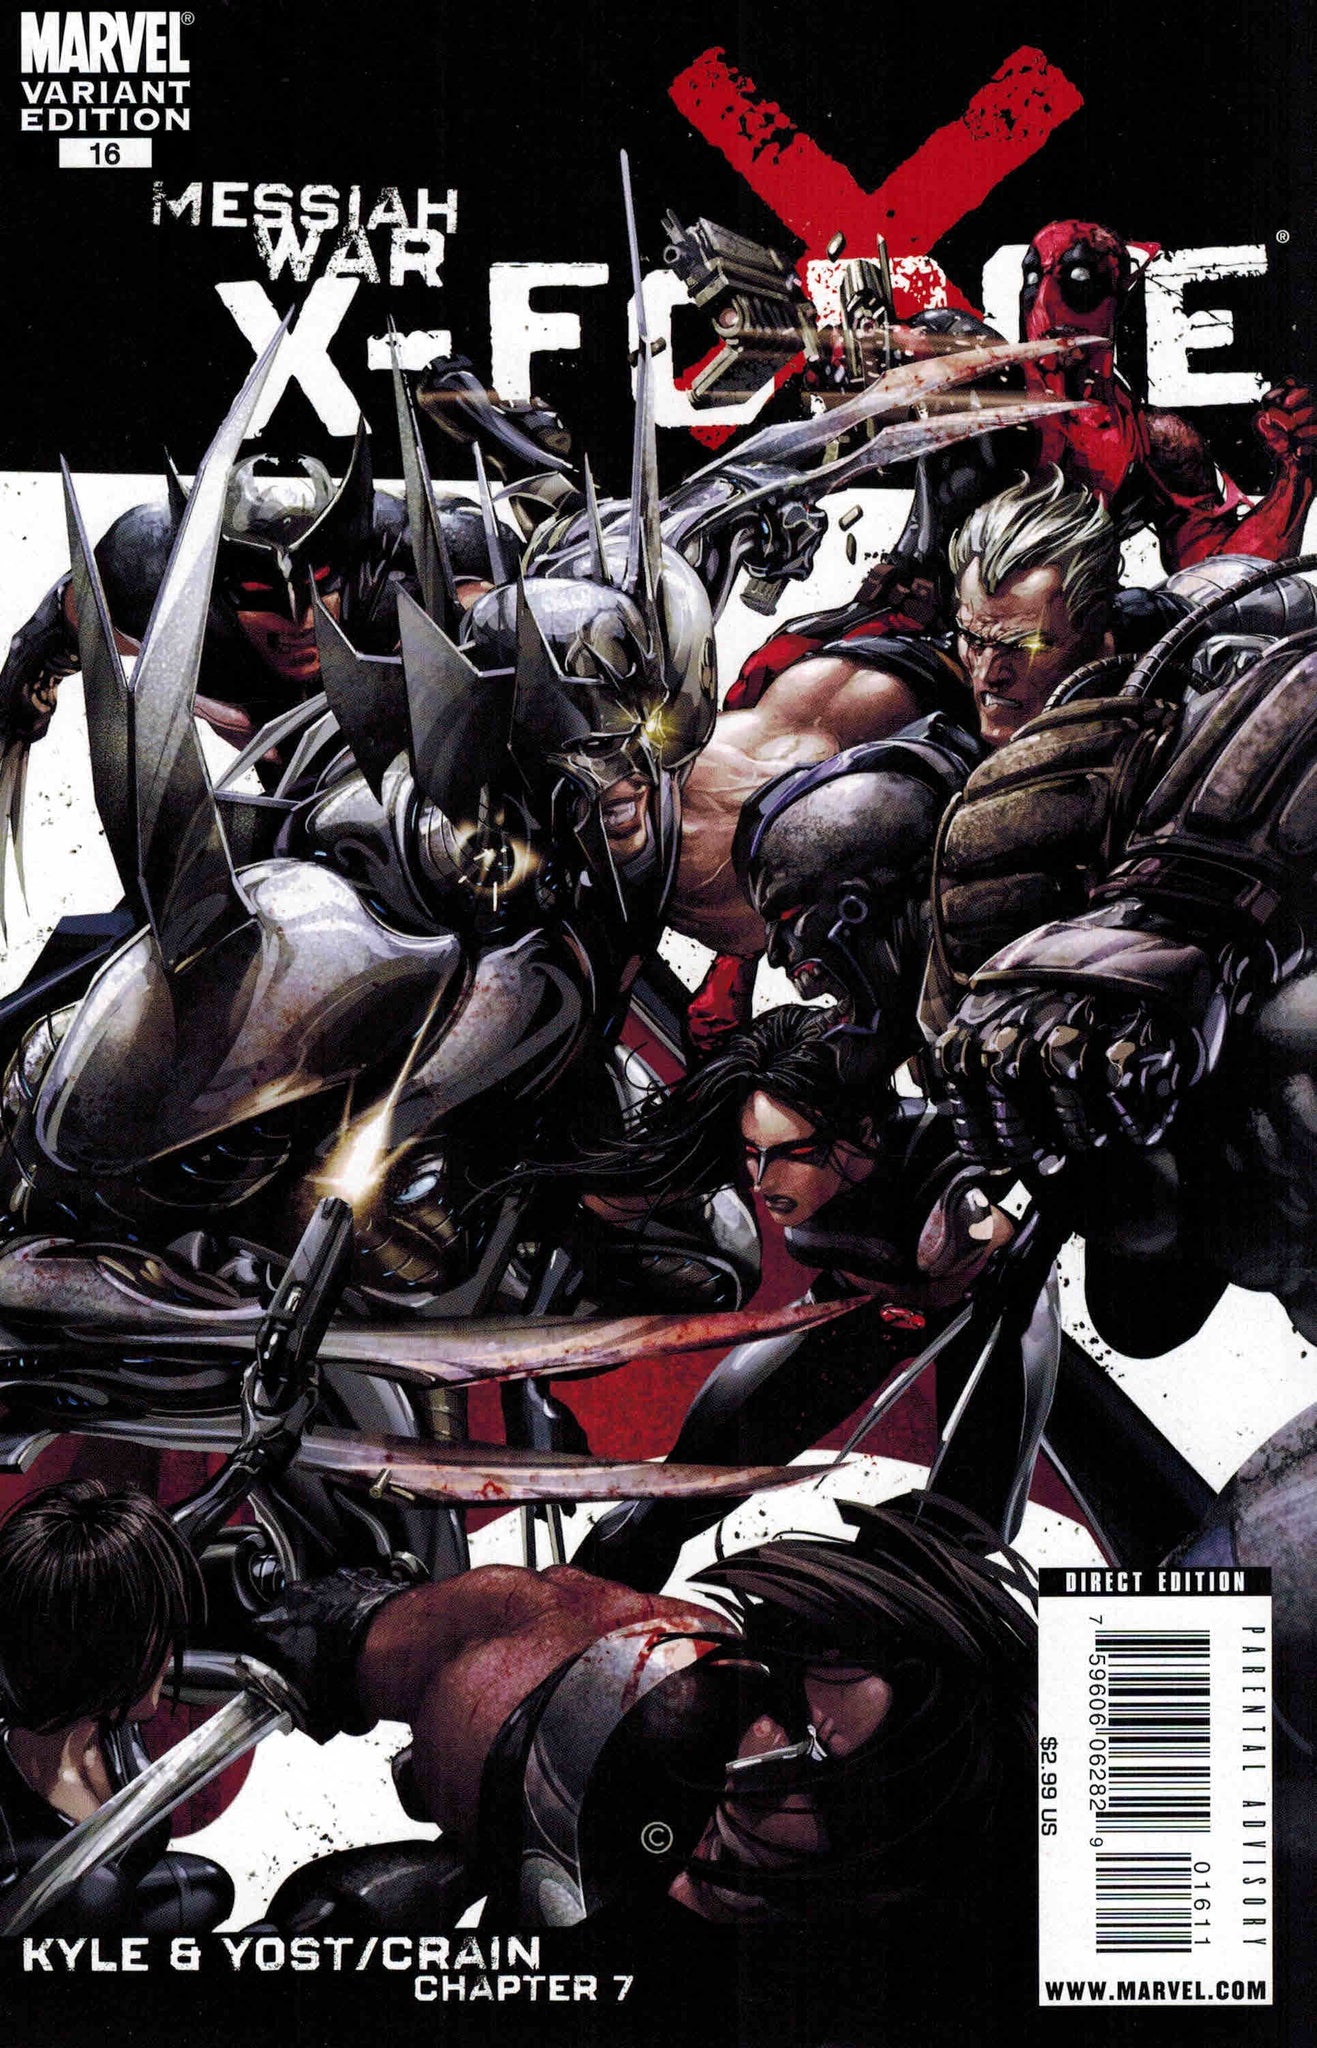 X-Force (2008) #16 Clayton Crain Cover